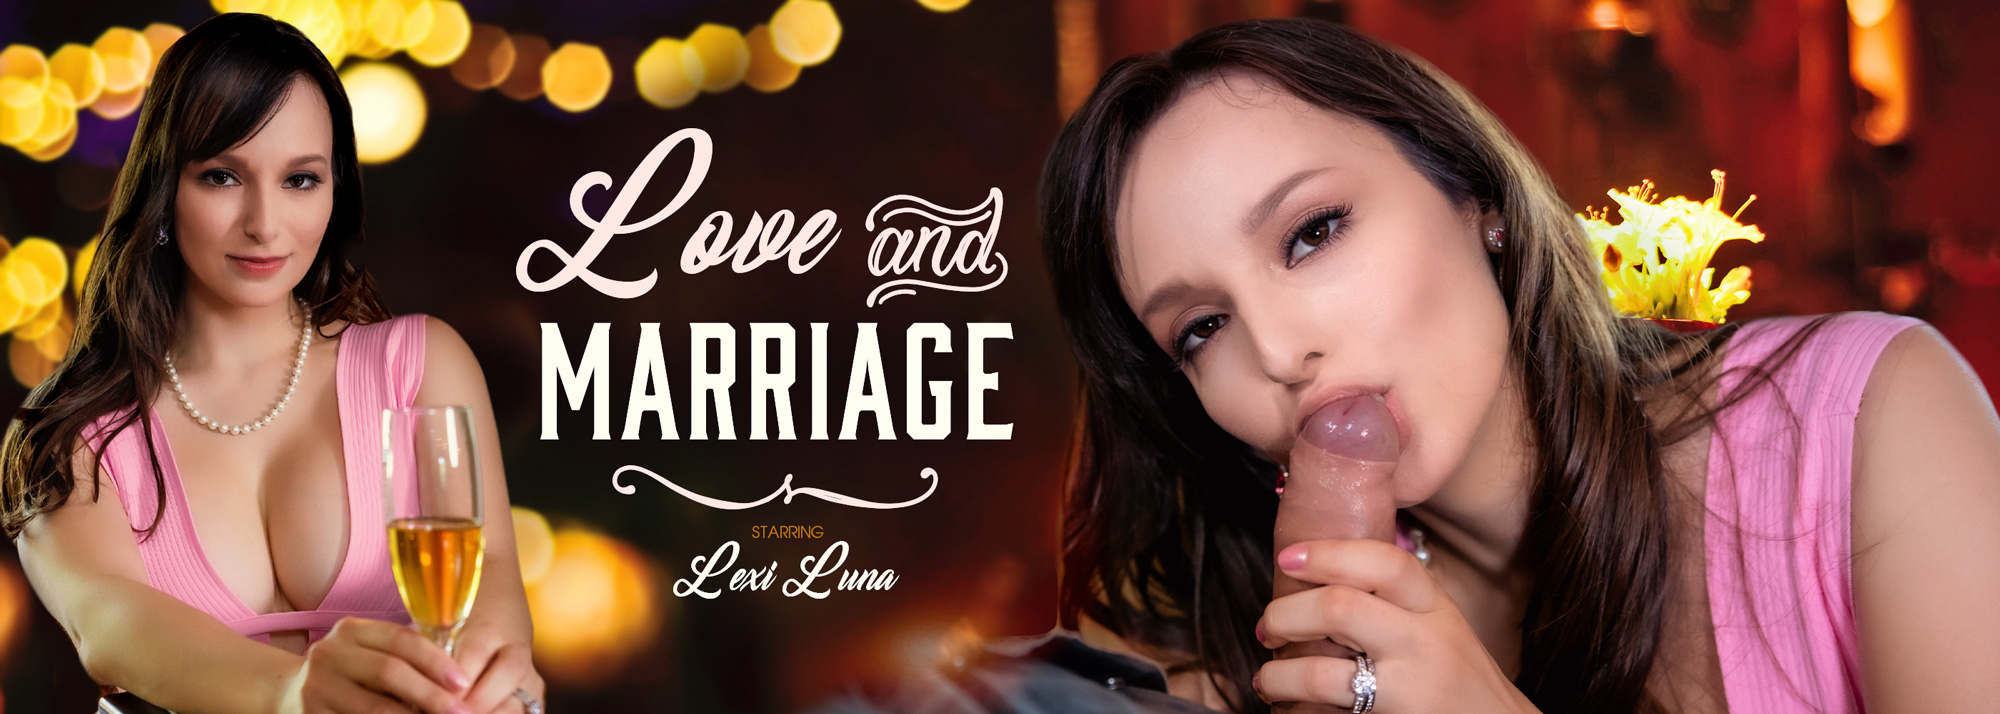 Love and Marriage with Lexi Luna  Slideshow